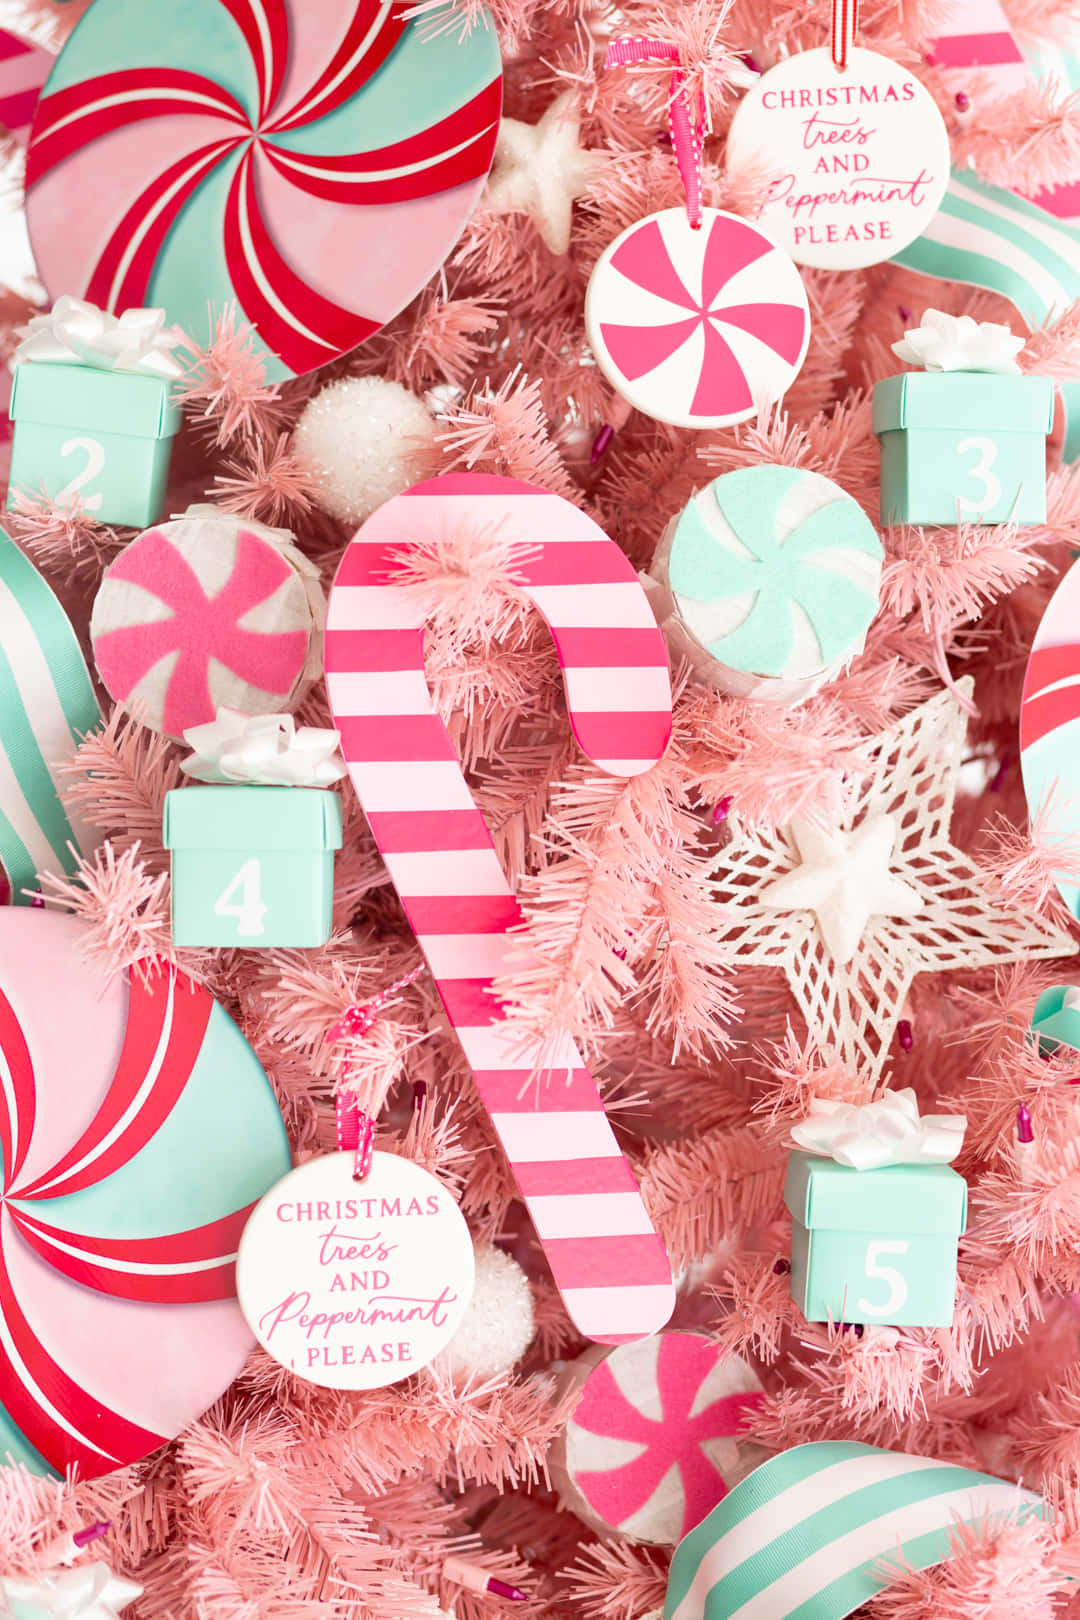 Celebrate the holidays in a festive and fun way with this charming Pink Christmas Tree. Wallpaper